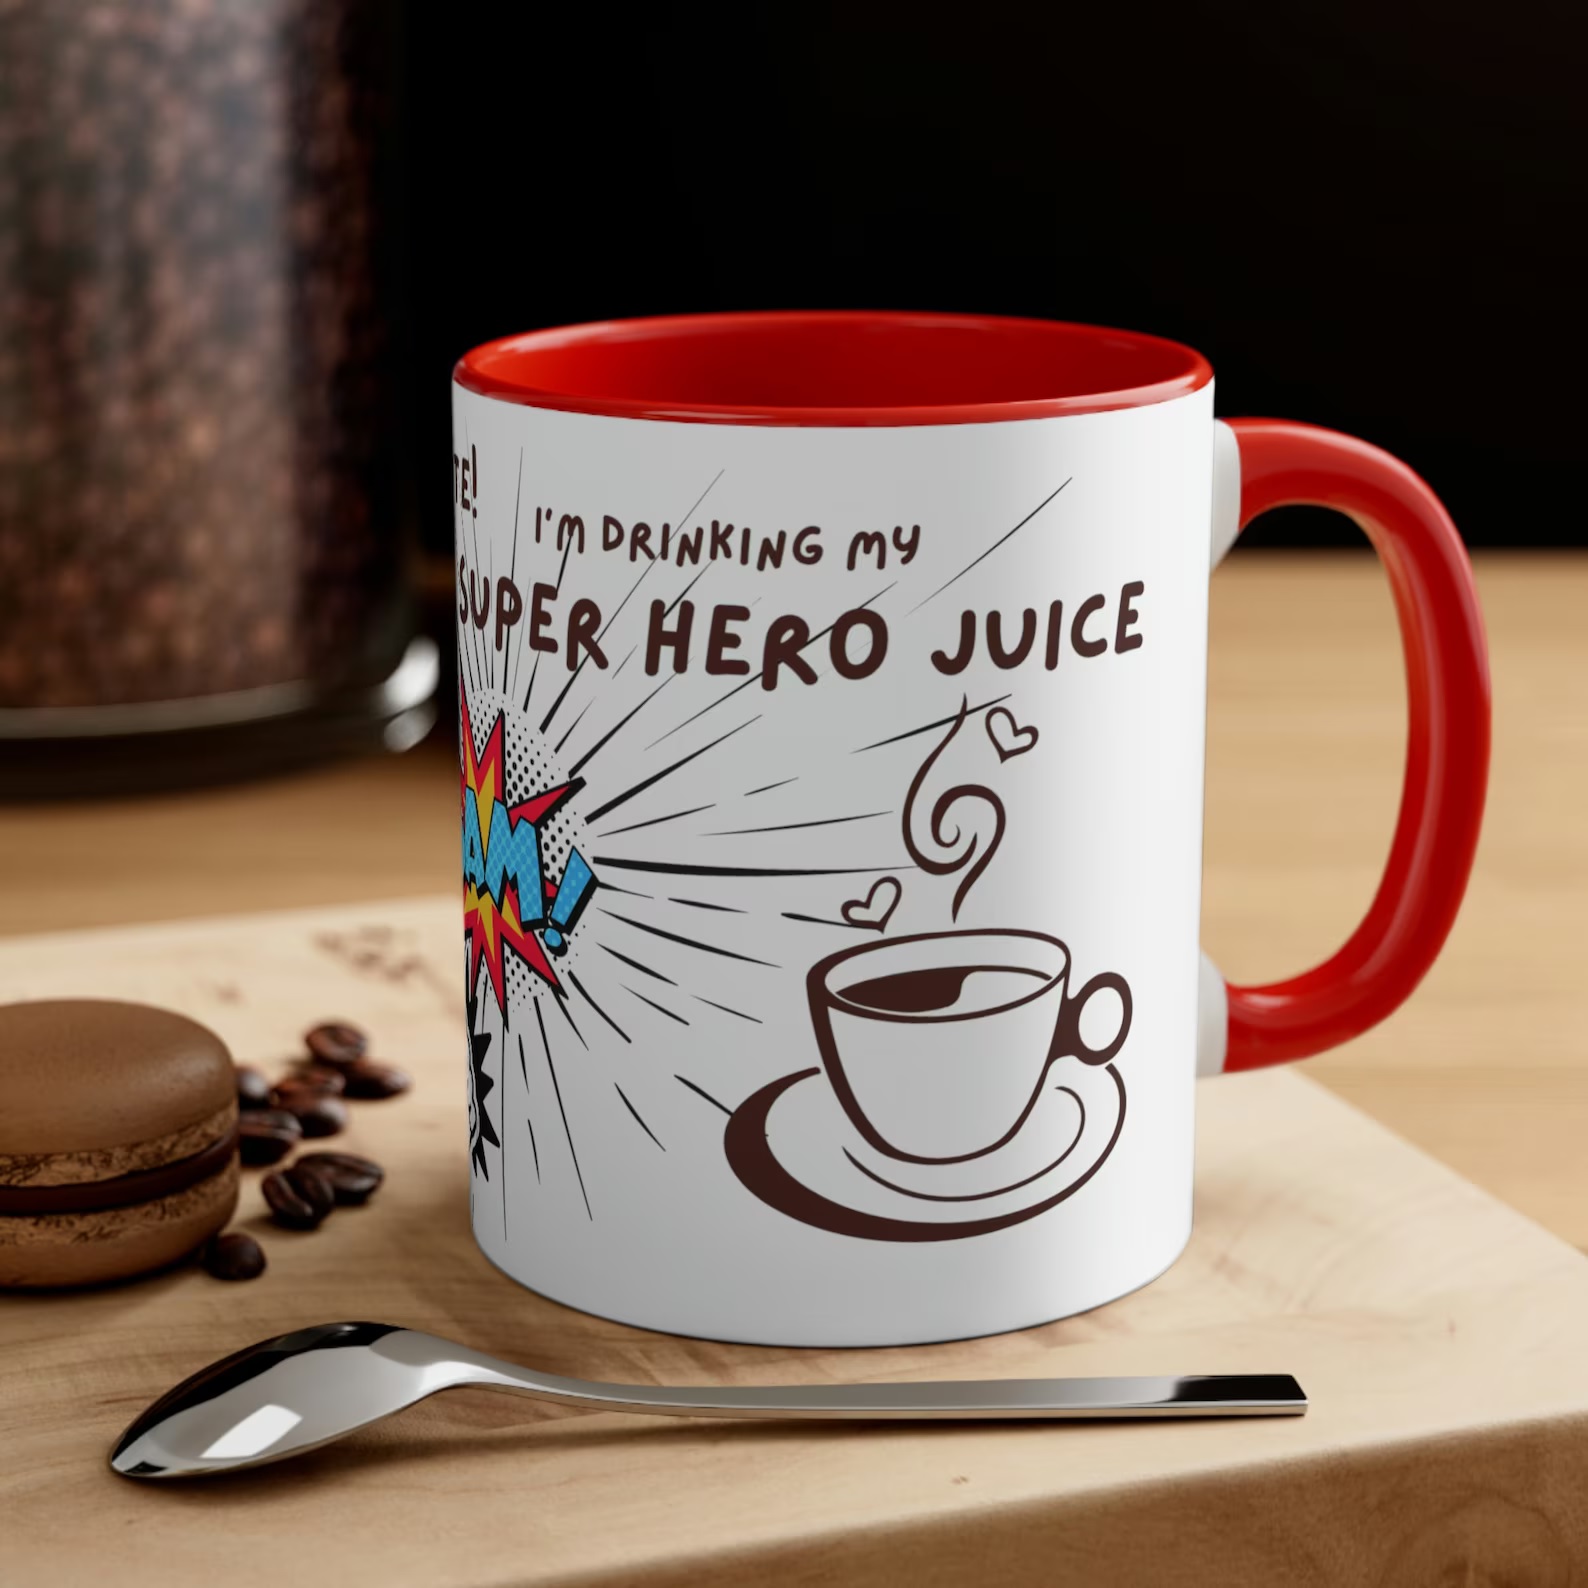 A white mug with a red handle and interior. Comic sans text reads, "Give me a minute! I'm drinking my superhero juice." It is decorated by images of a coffee cup and several onomatopoeias,